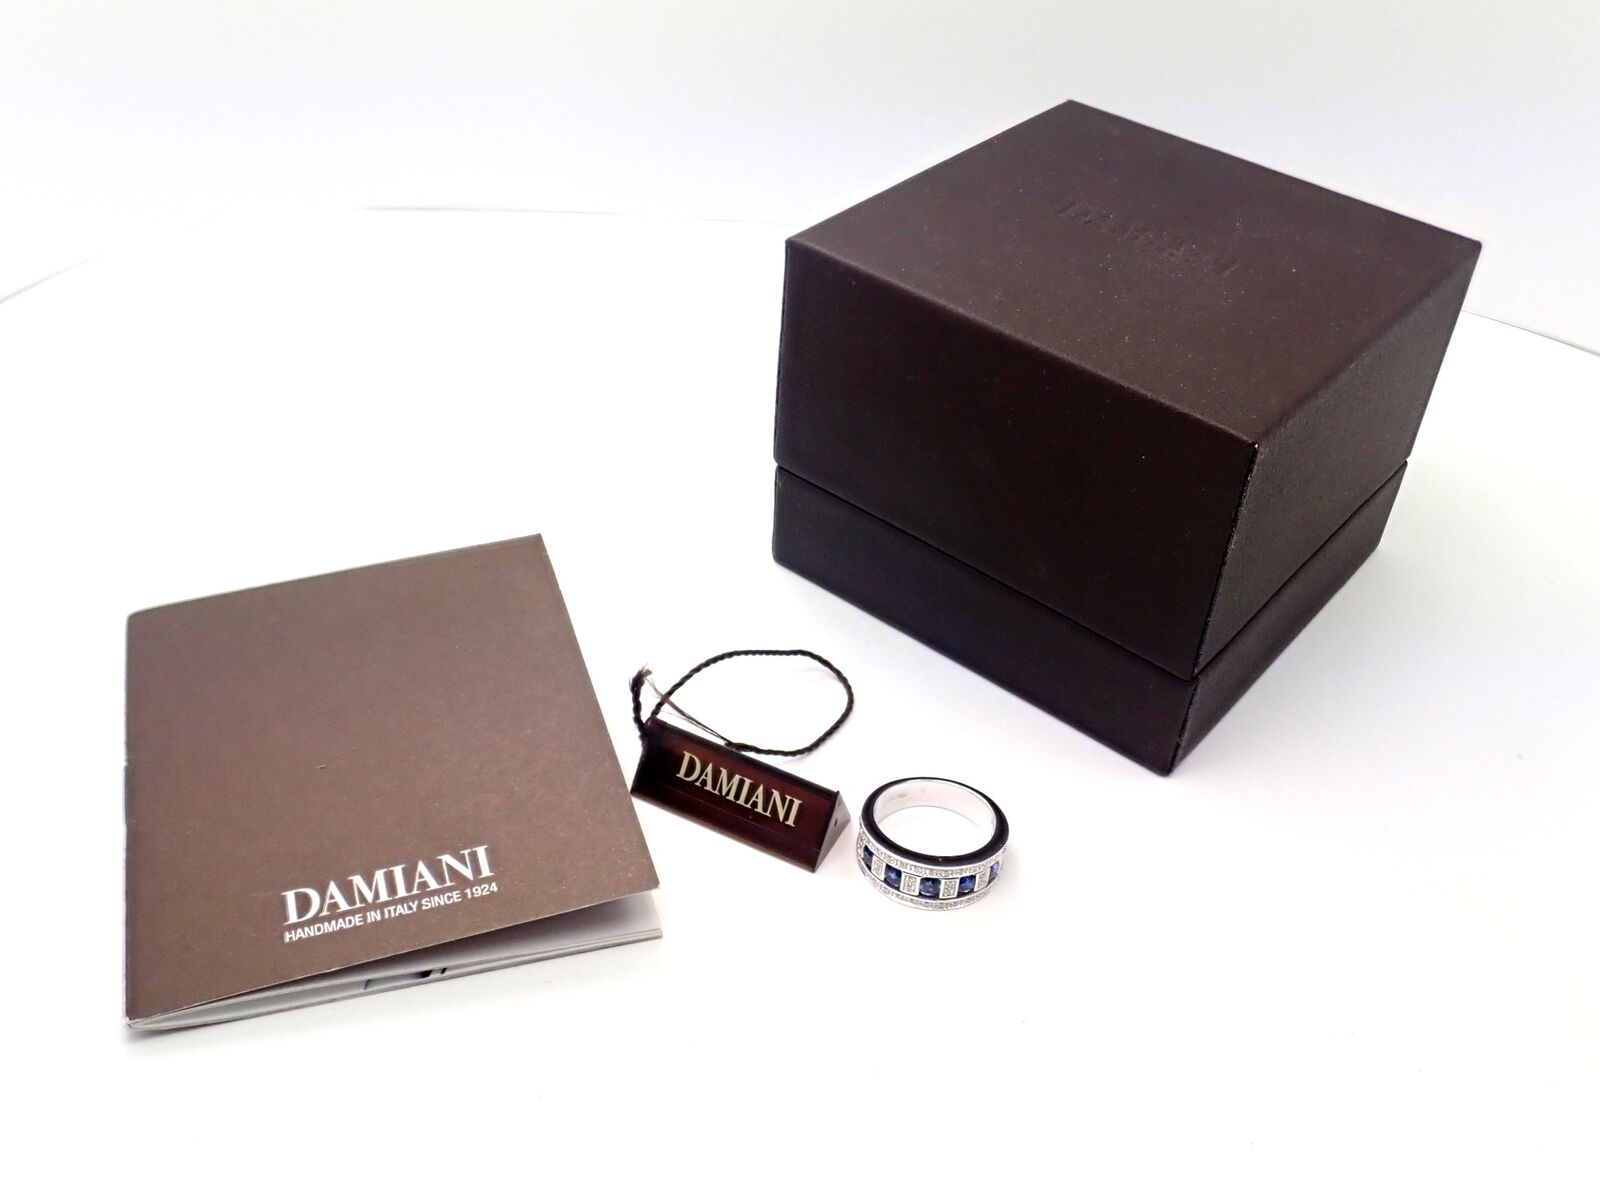 Damiani Jewelry & Watches:Fine Jewelry:Rings Authentic Damiani 18k White Gold Diamond Sapphire Belle Epoque Ring